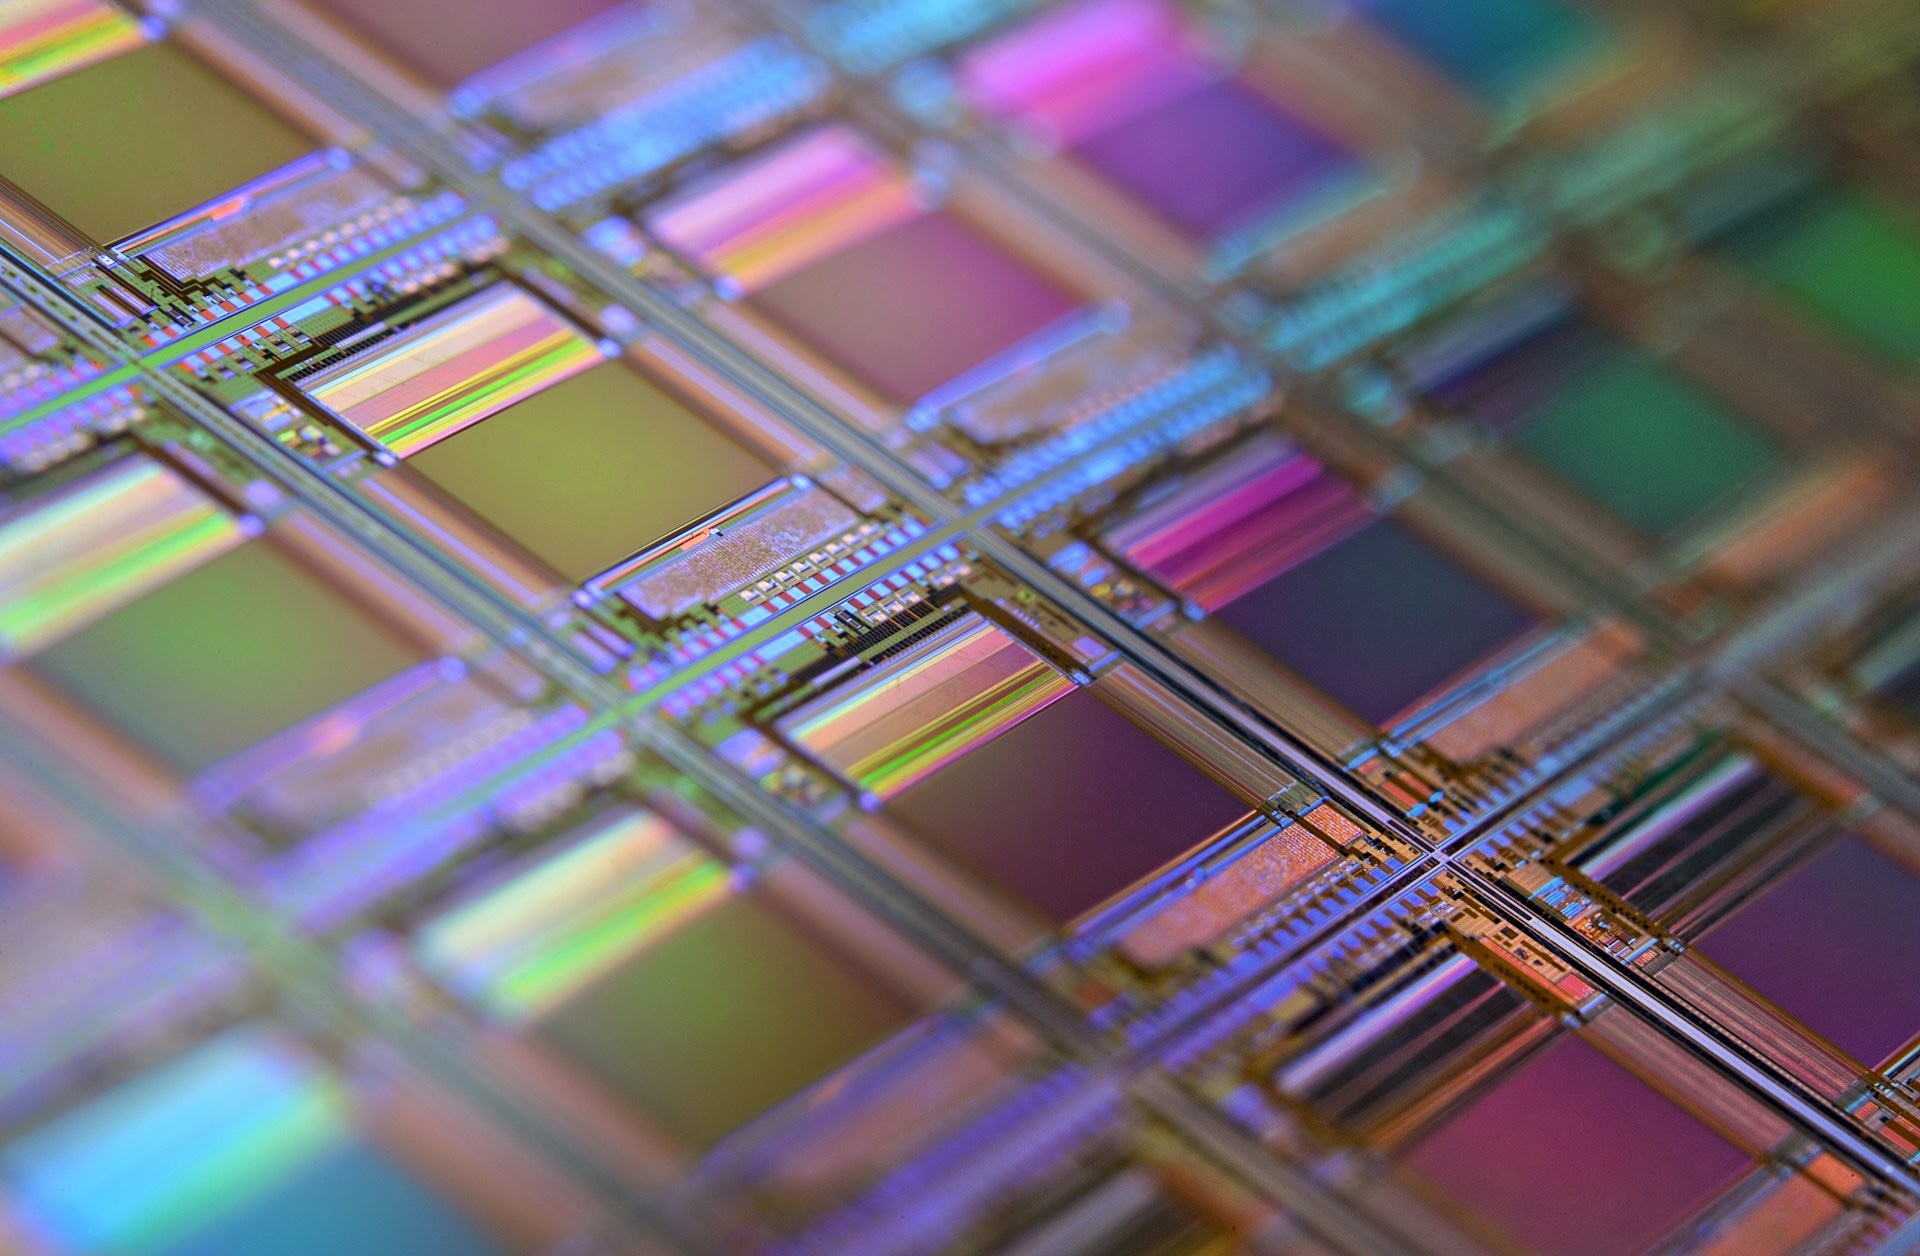 Advancements in Light-Based Chips Promise Faster, More Efficient Computing & Smarter AI in the Future